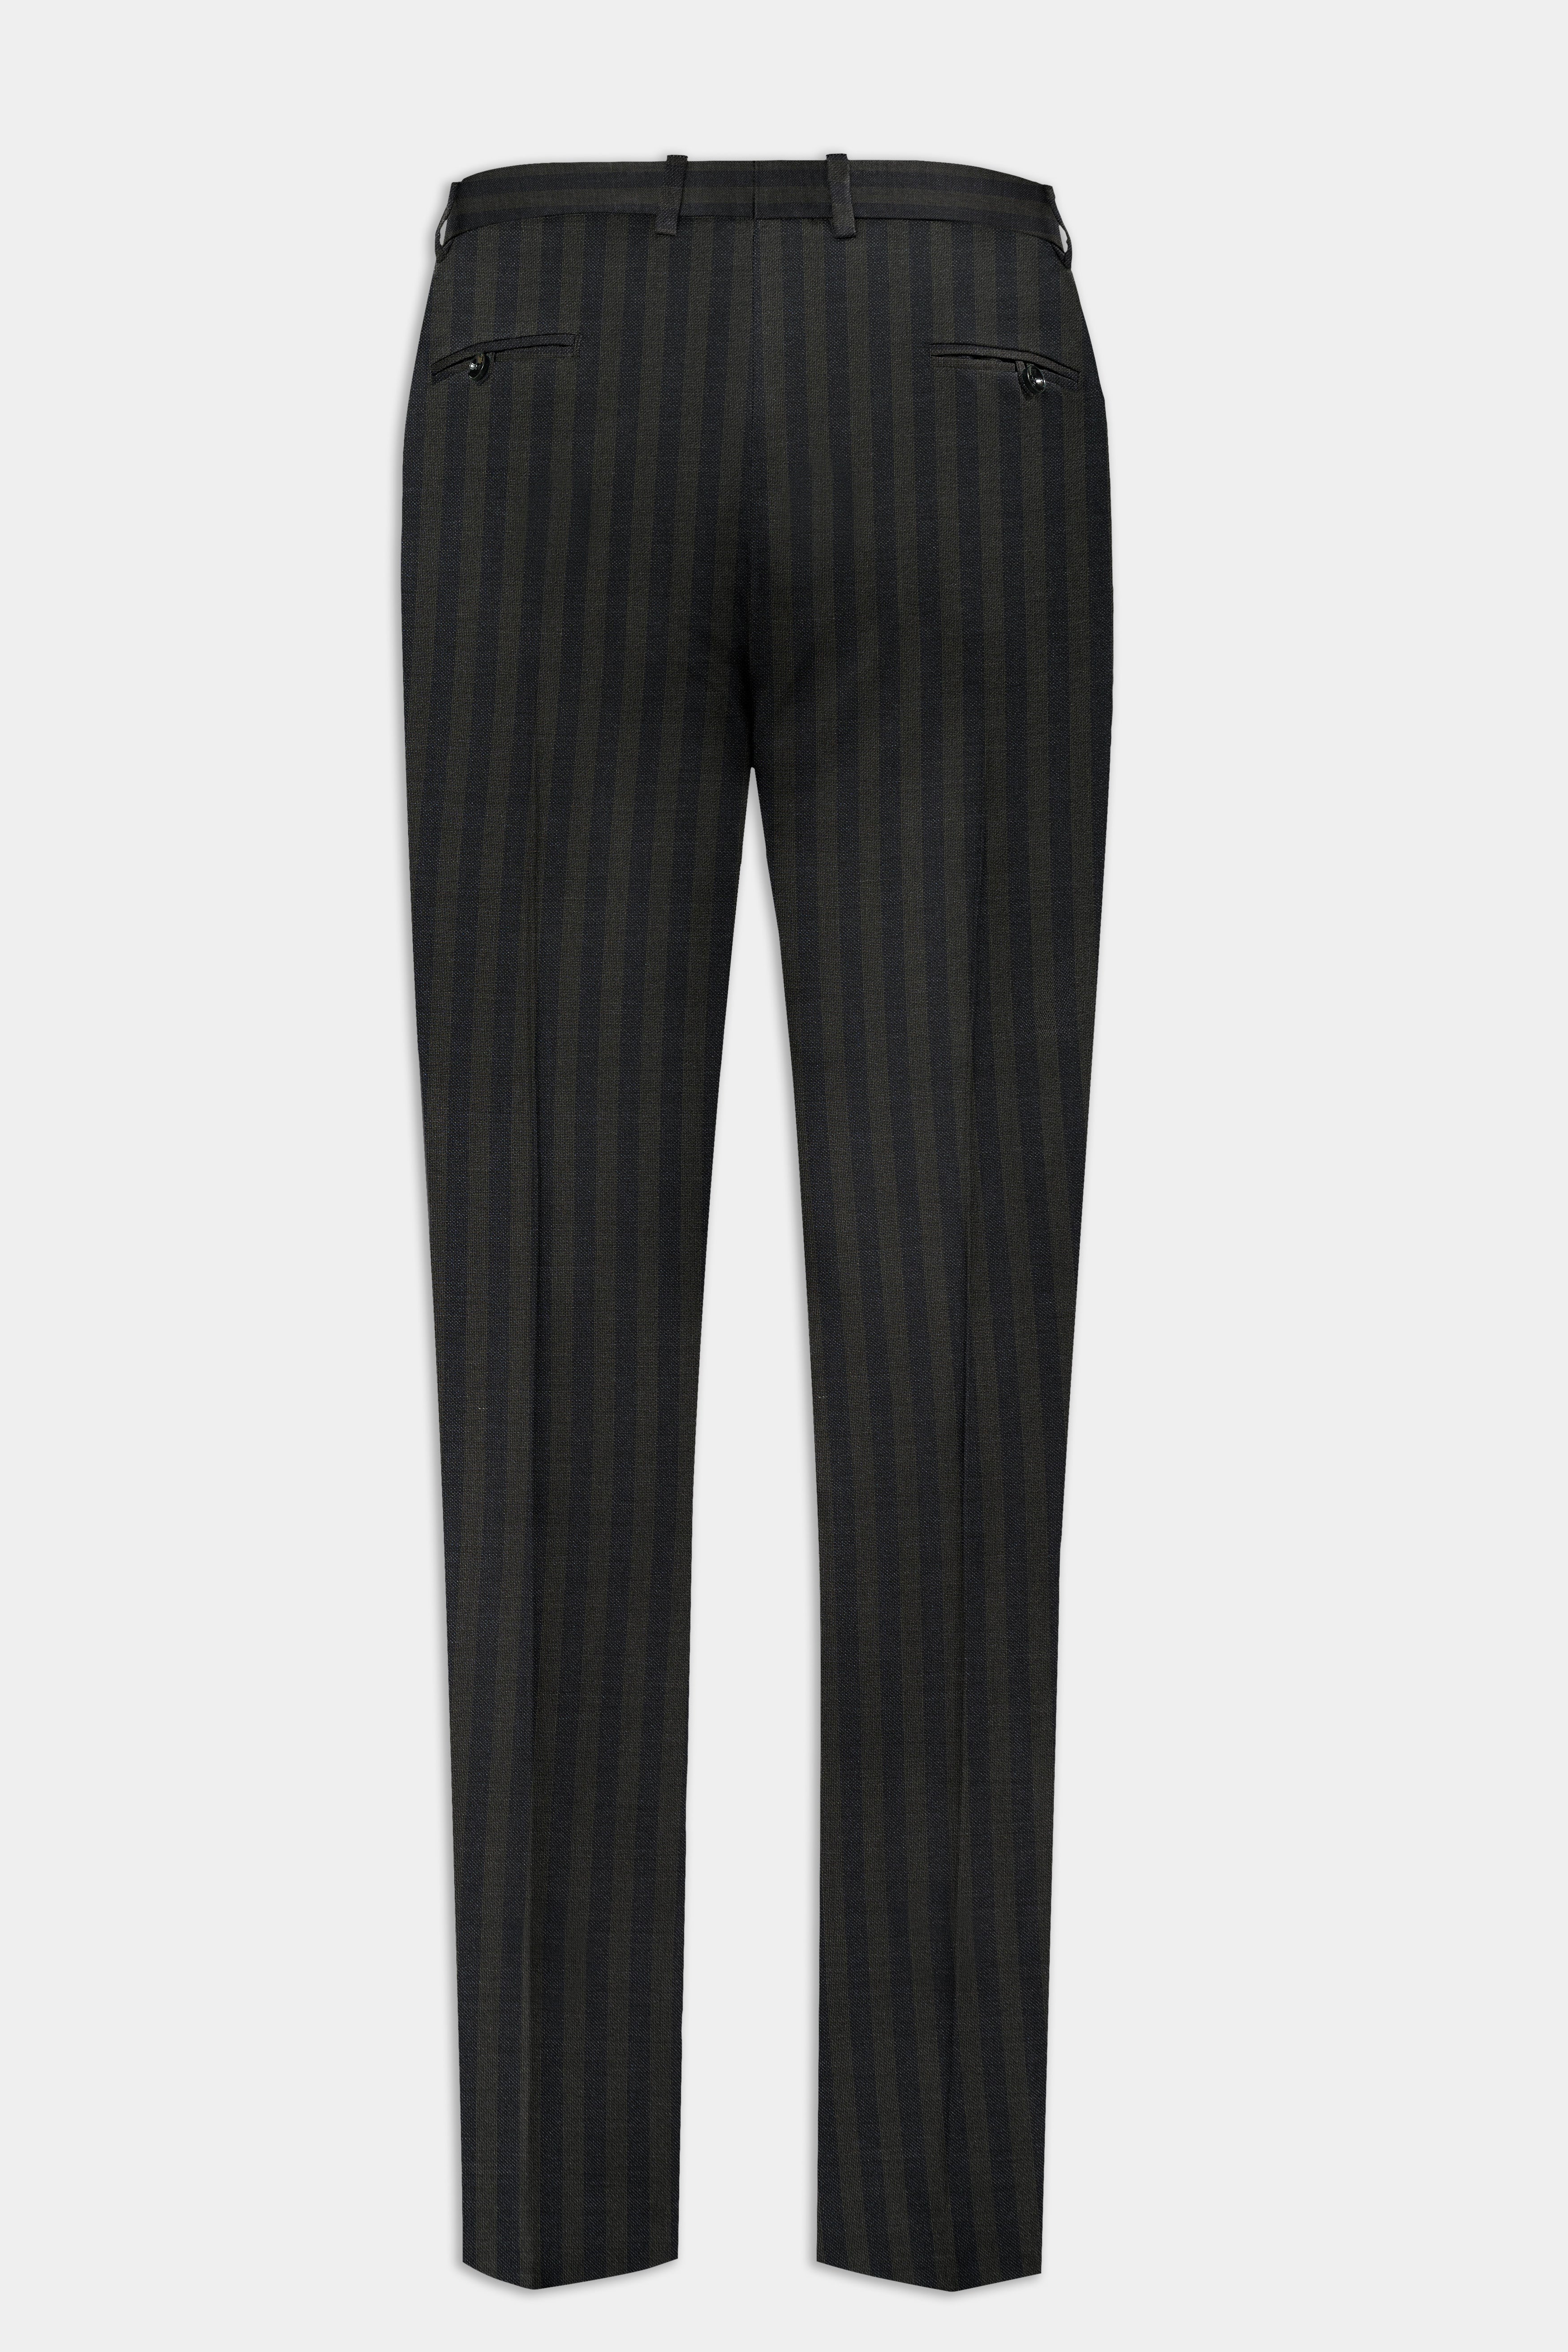 Heavy Green with Black Striped Wool Blend Pant